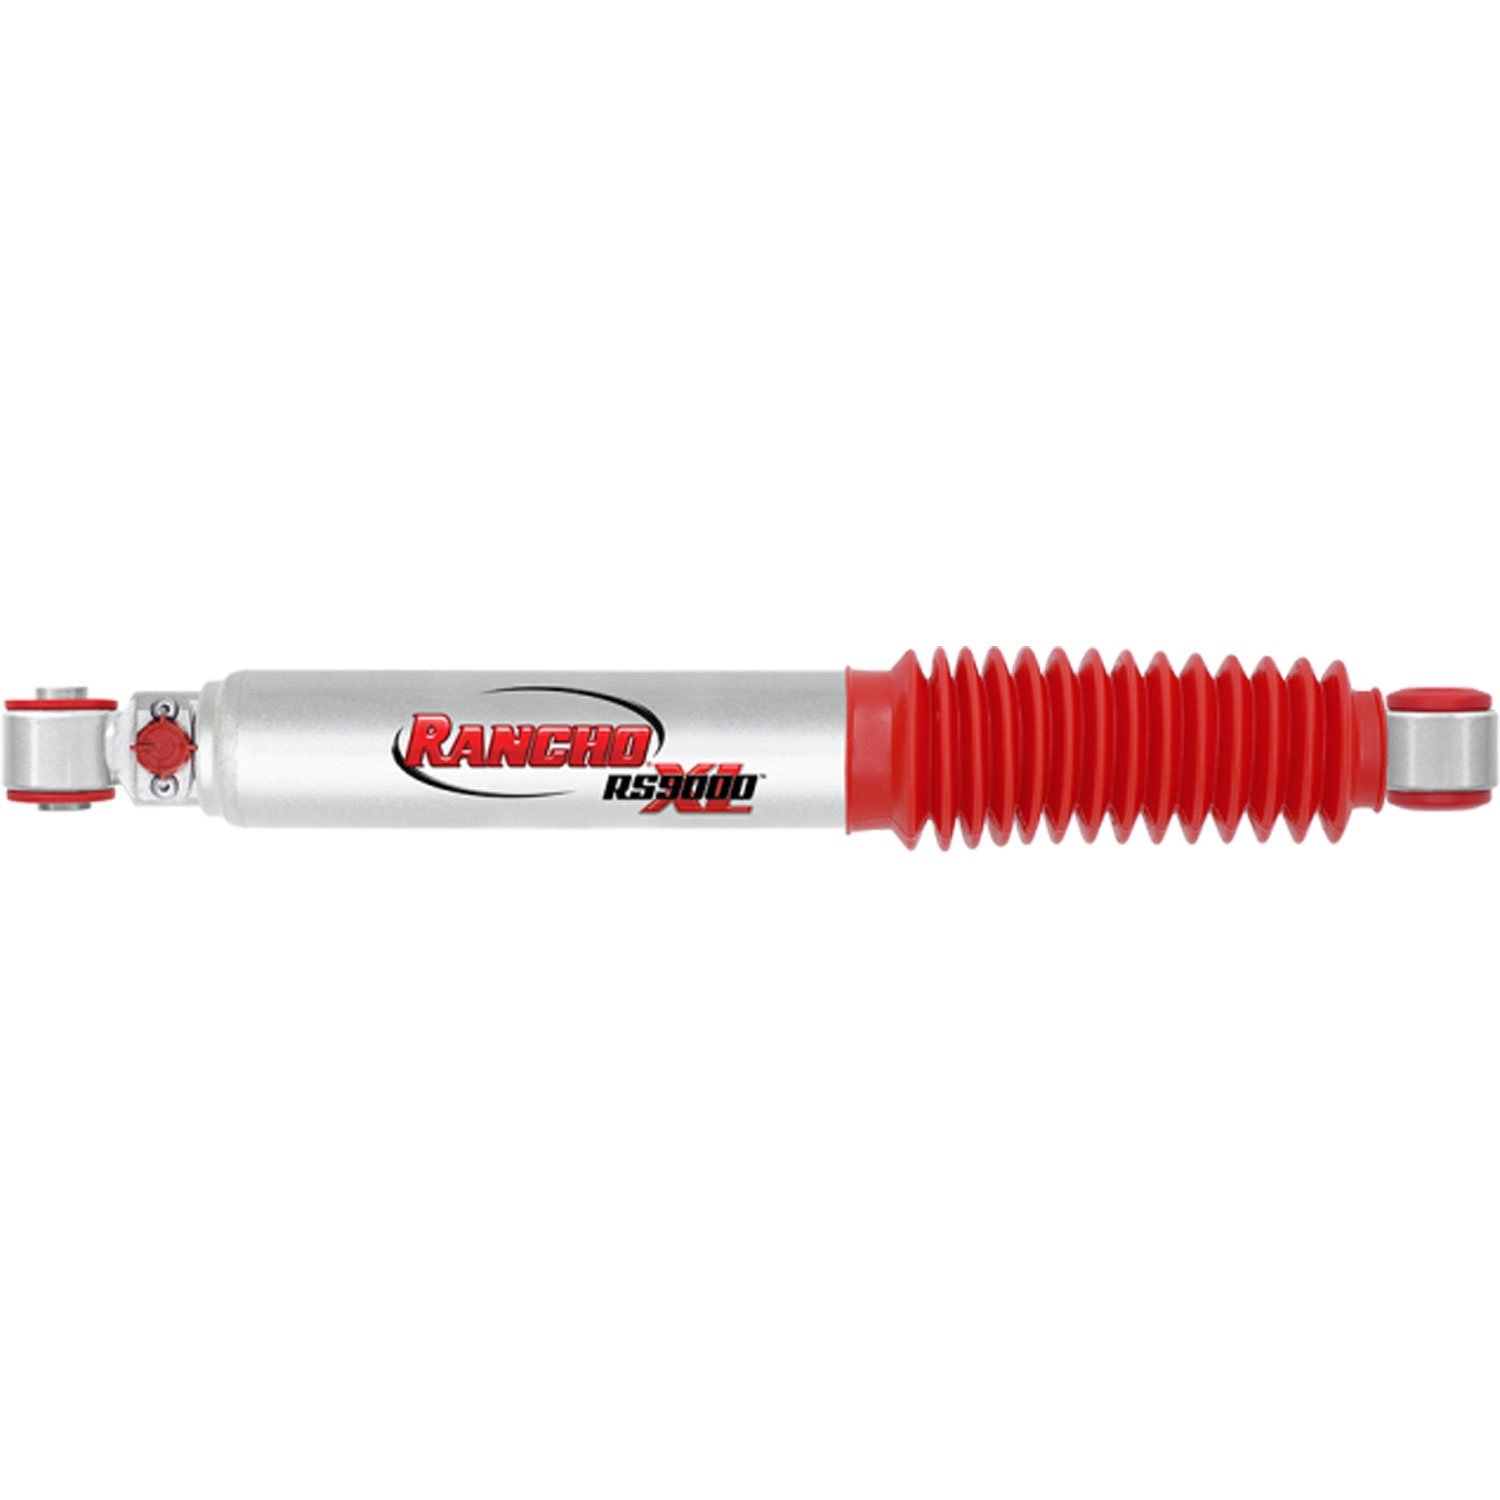 RS9000XL Rear Shock Absorber Fits Chevy Avalanche, GM Fullsize Pickups and SUVs